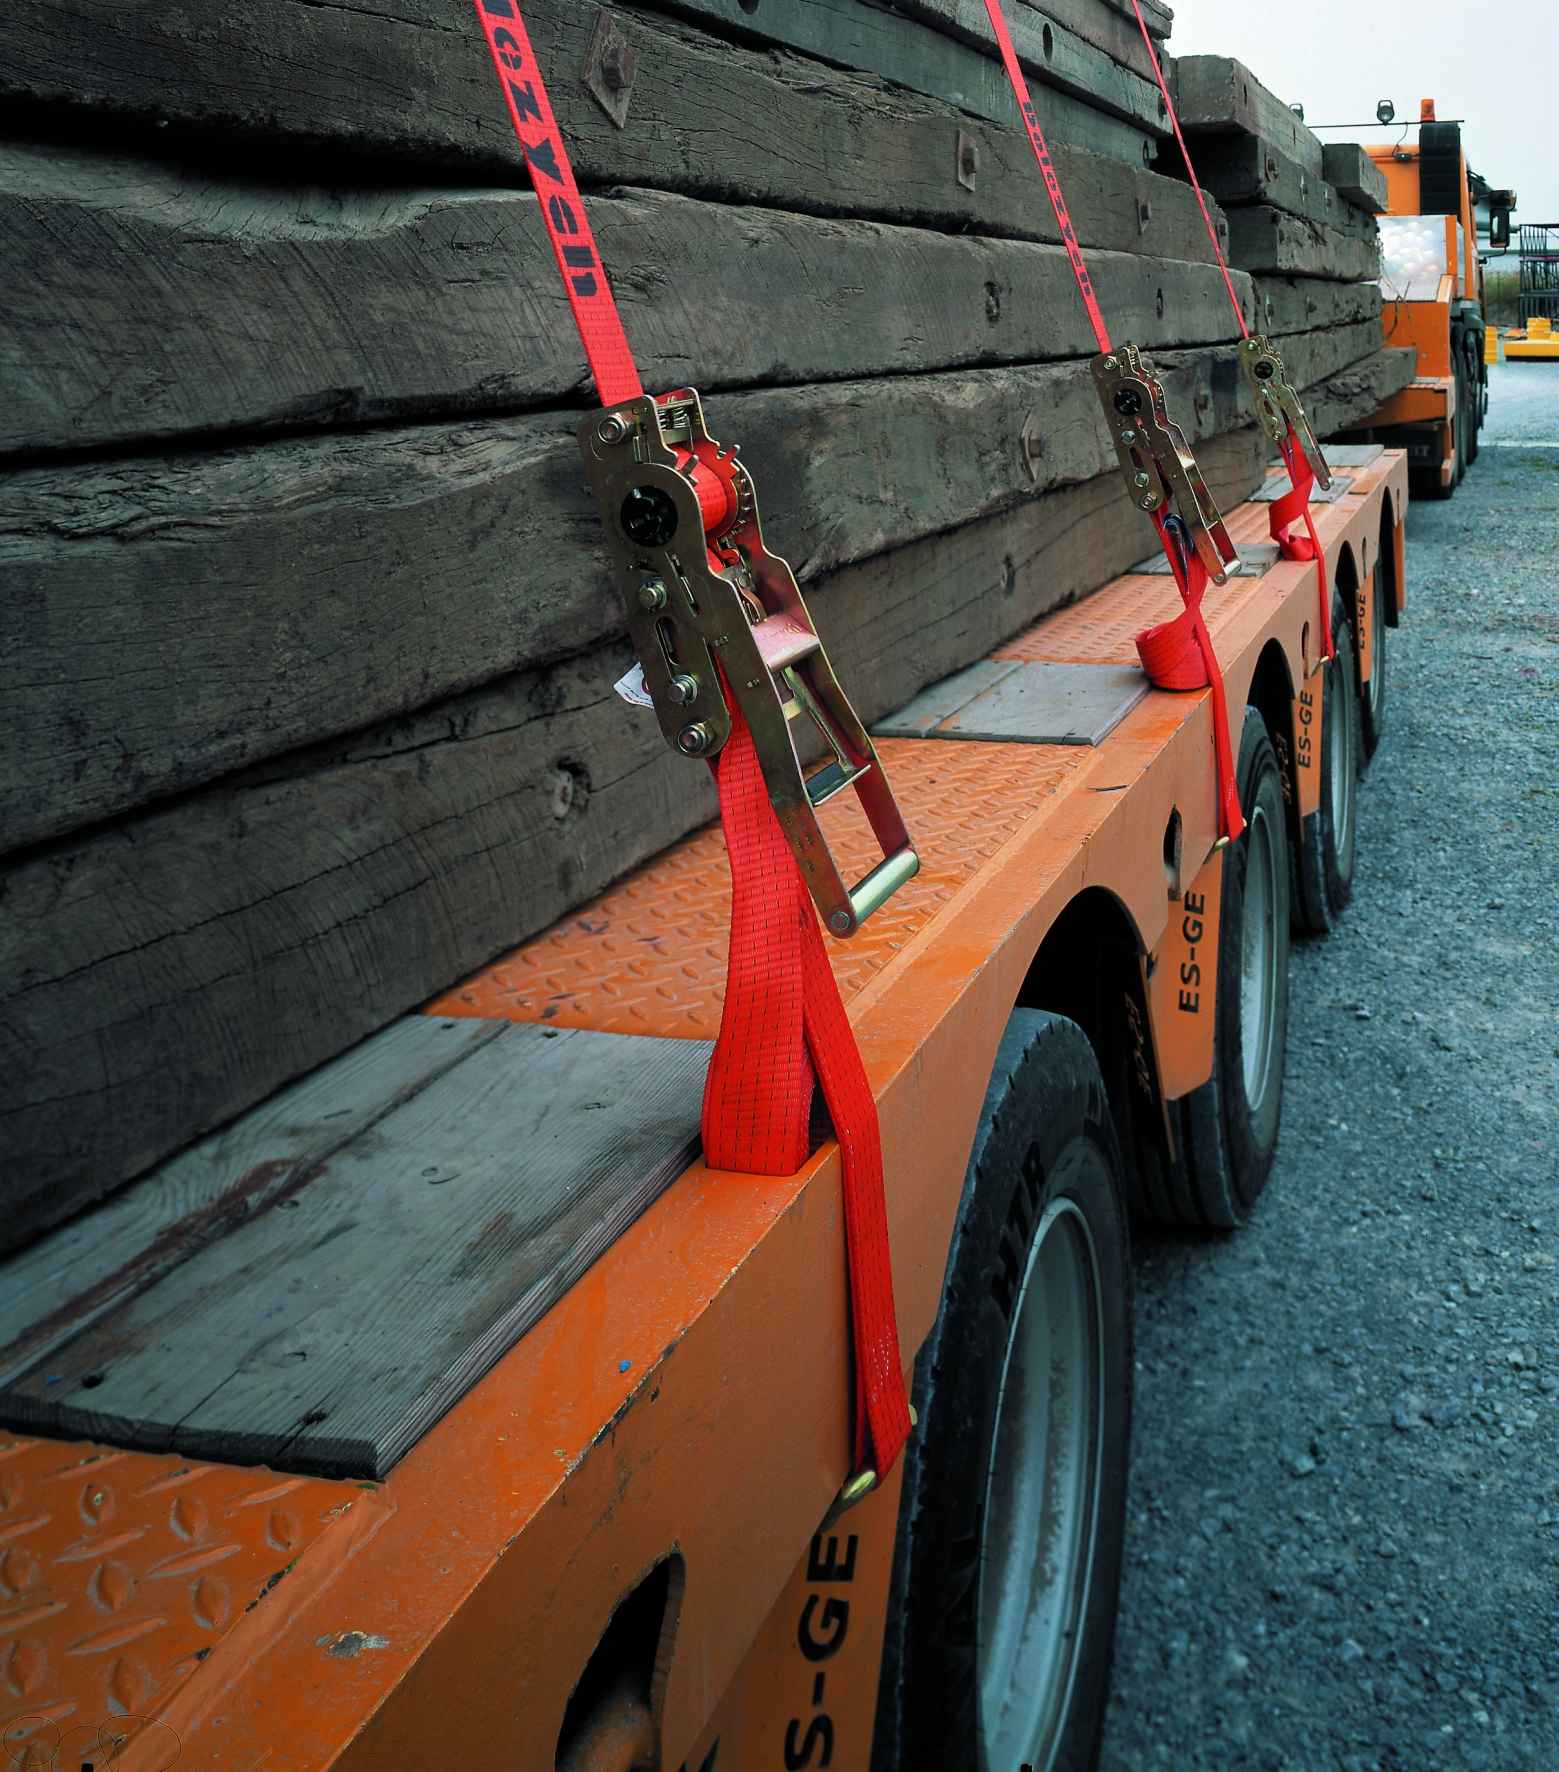 Doleco USA makes a wide variety of cargo management and load securement equipment